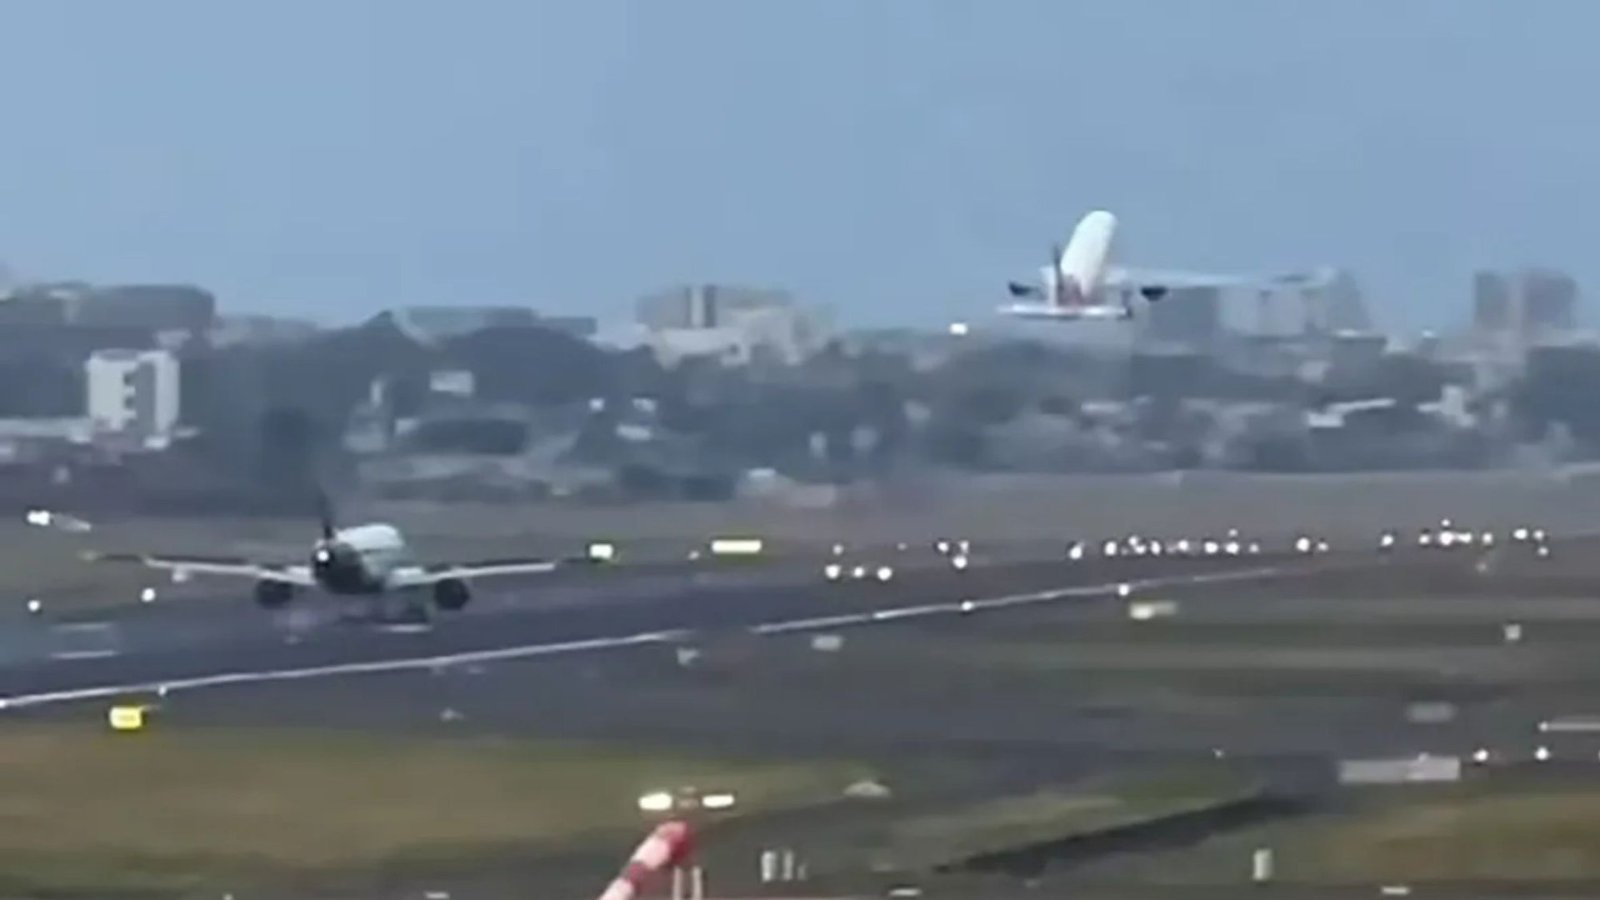 Terrifying moment passenger plane lands just metres behind another at Mumbai airport in heart-stopping near-miss